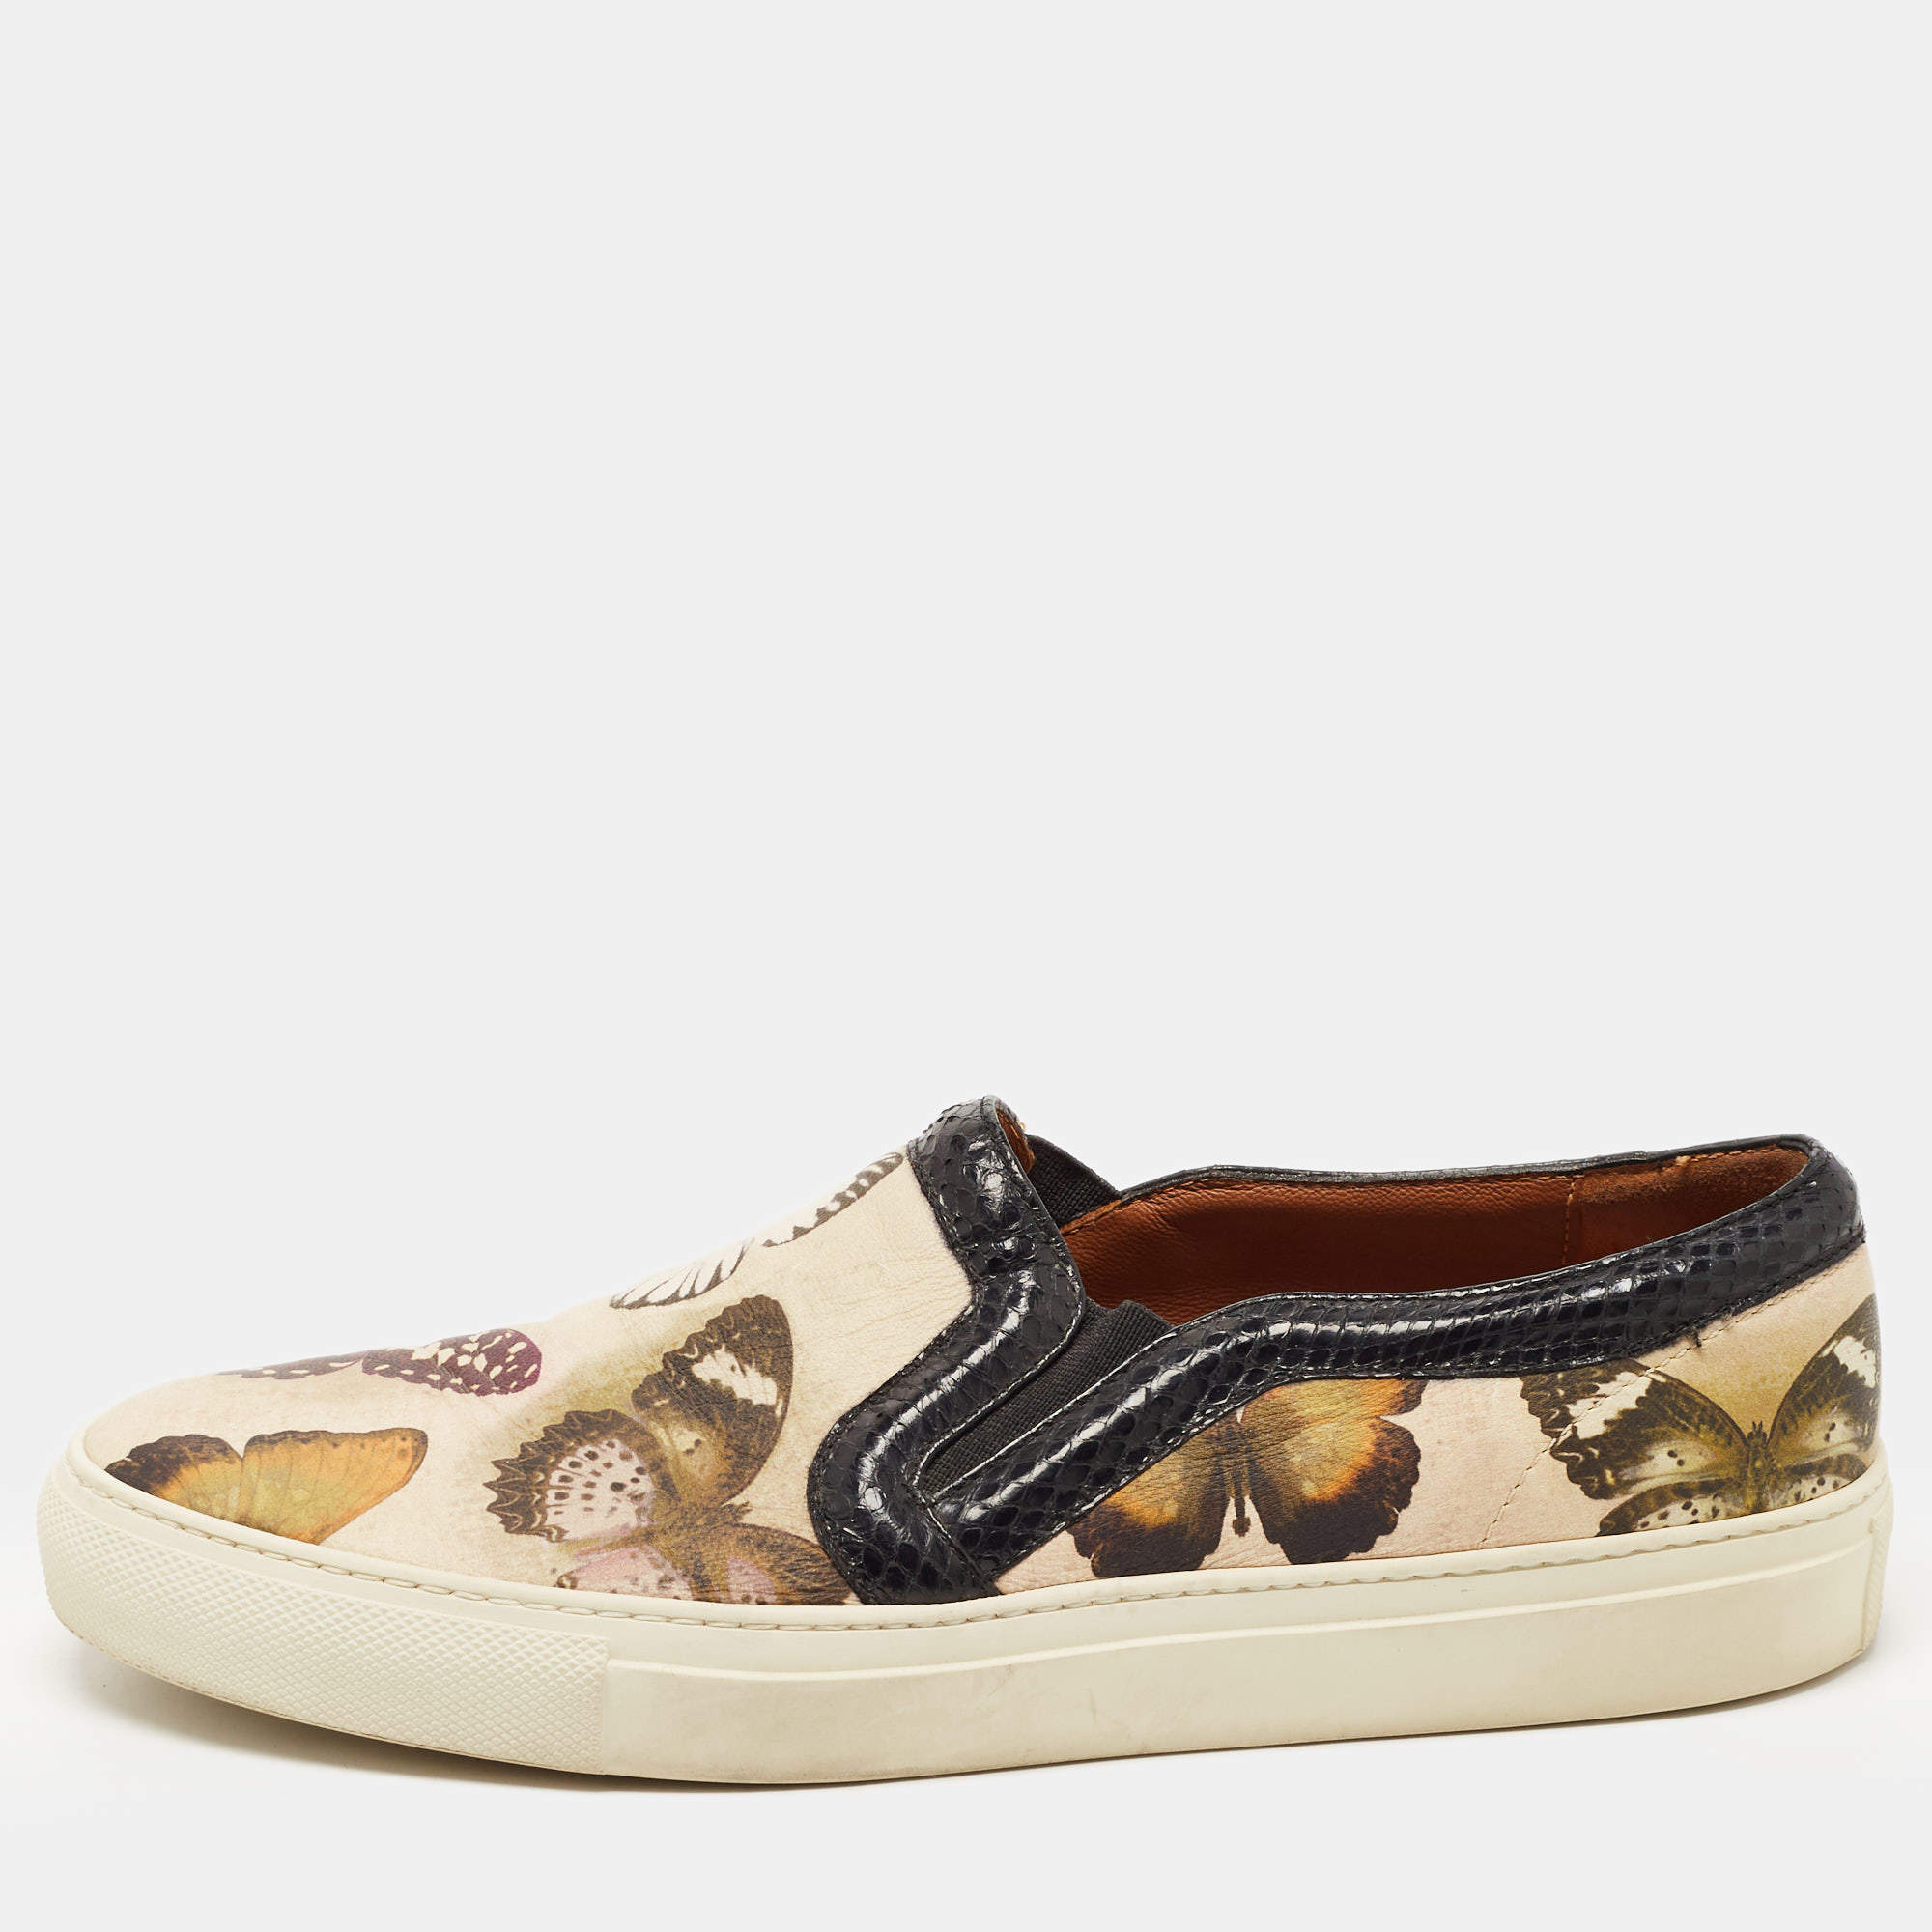 Givenchy Multicolor Butterfly Print Snakeskin Leather Slip On Sneakers Size 39.5